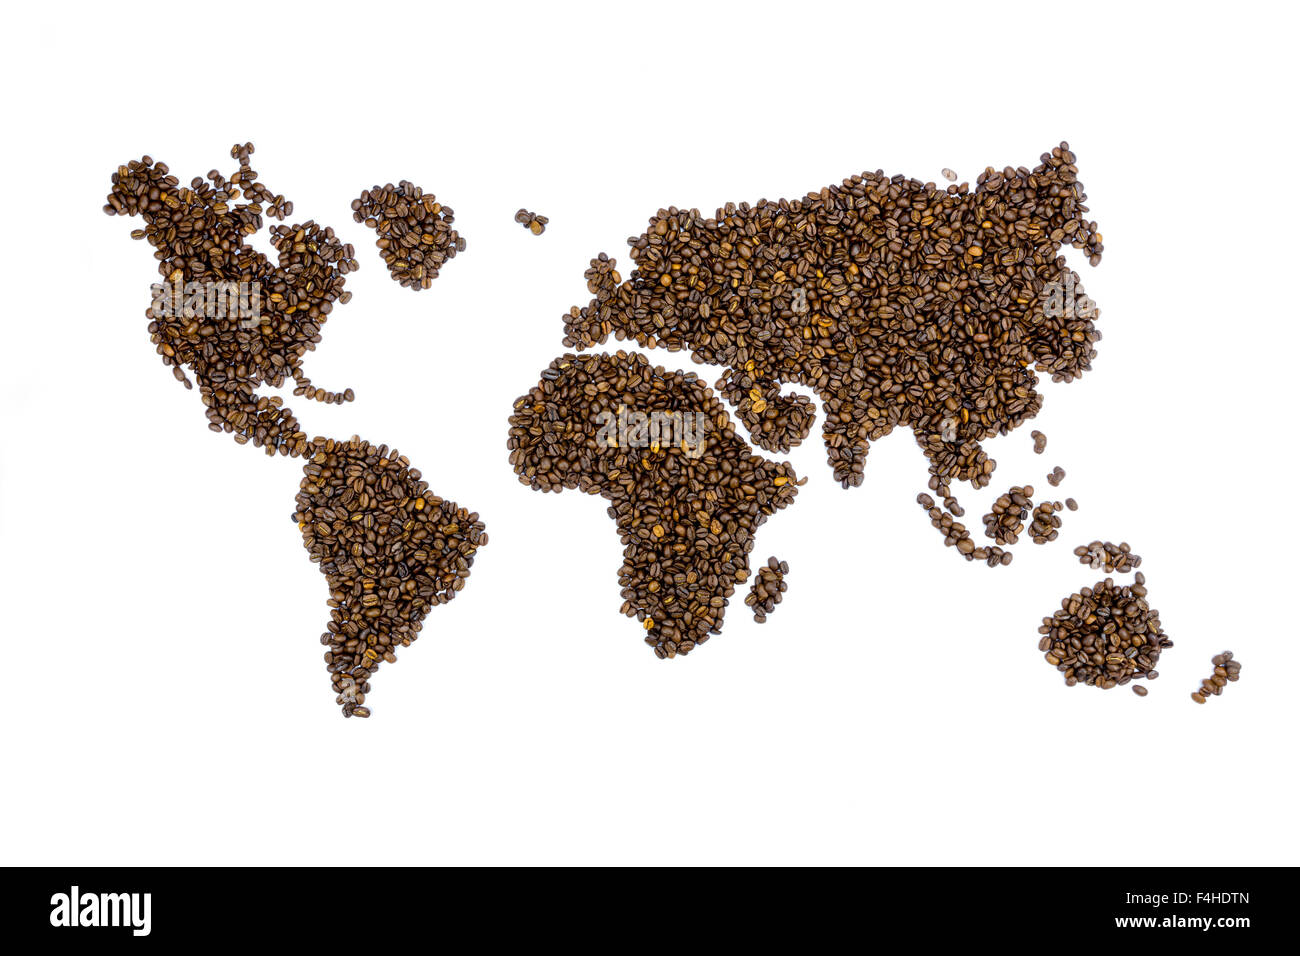 World map filled with coffee beans isolated on white background Stock Photo